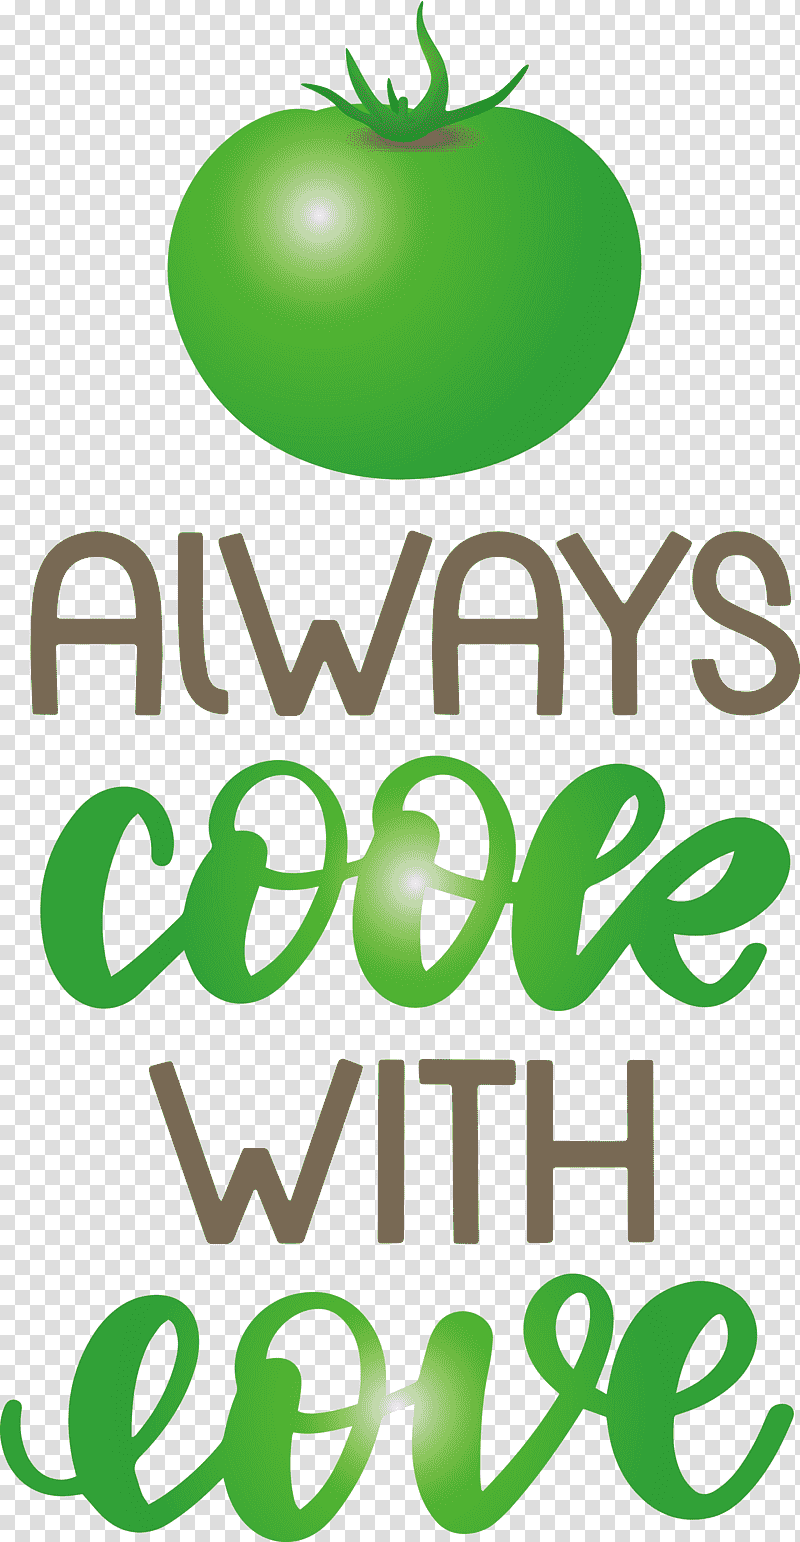 Always Cook With Love Food Kitchen, Logo, Green, Meter, Leaf, Mtree, Apple transparent background PNG clipart